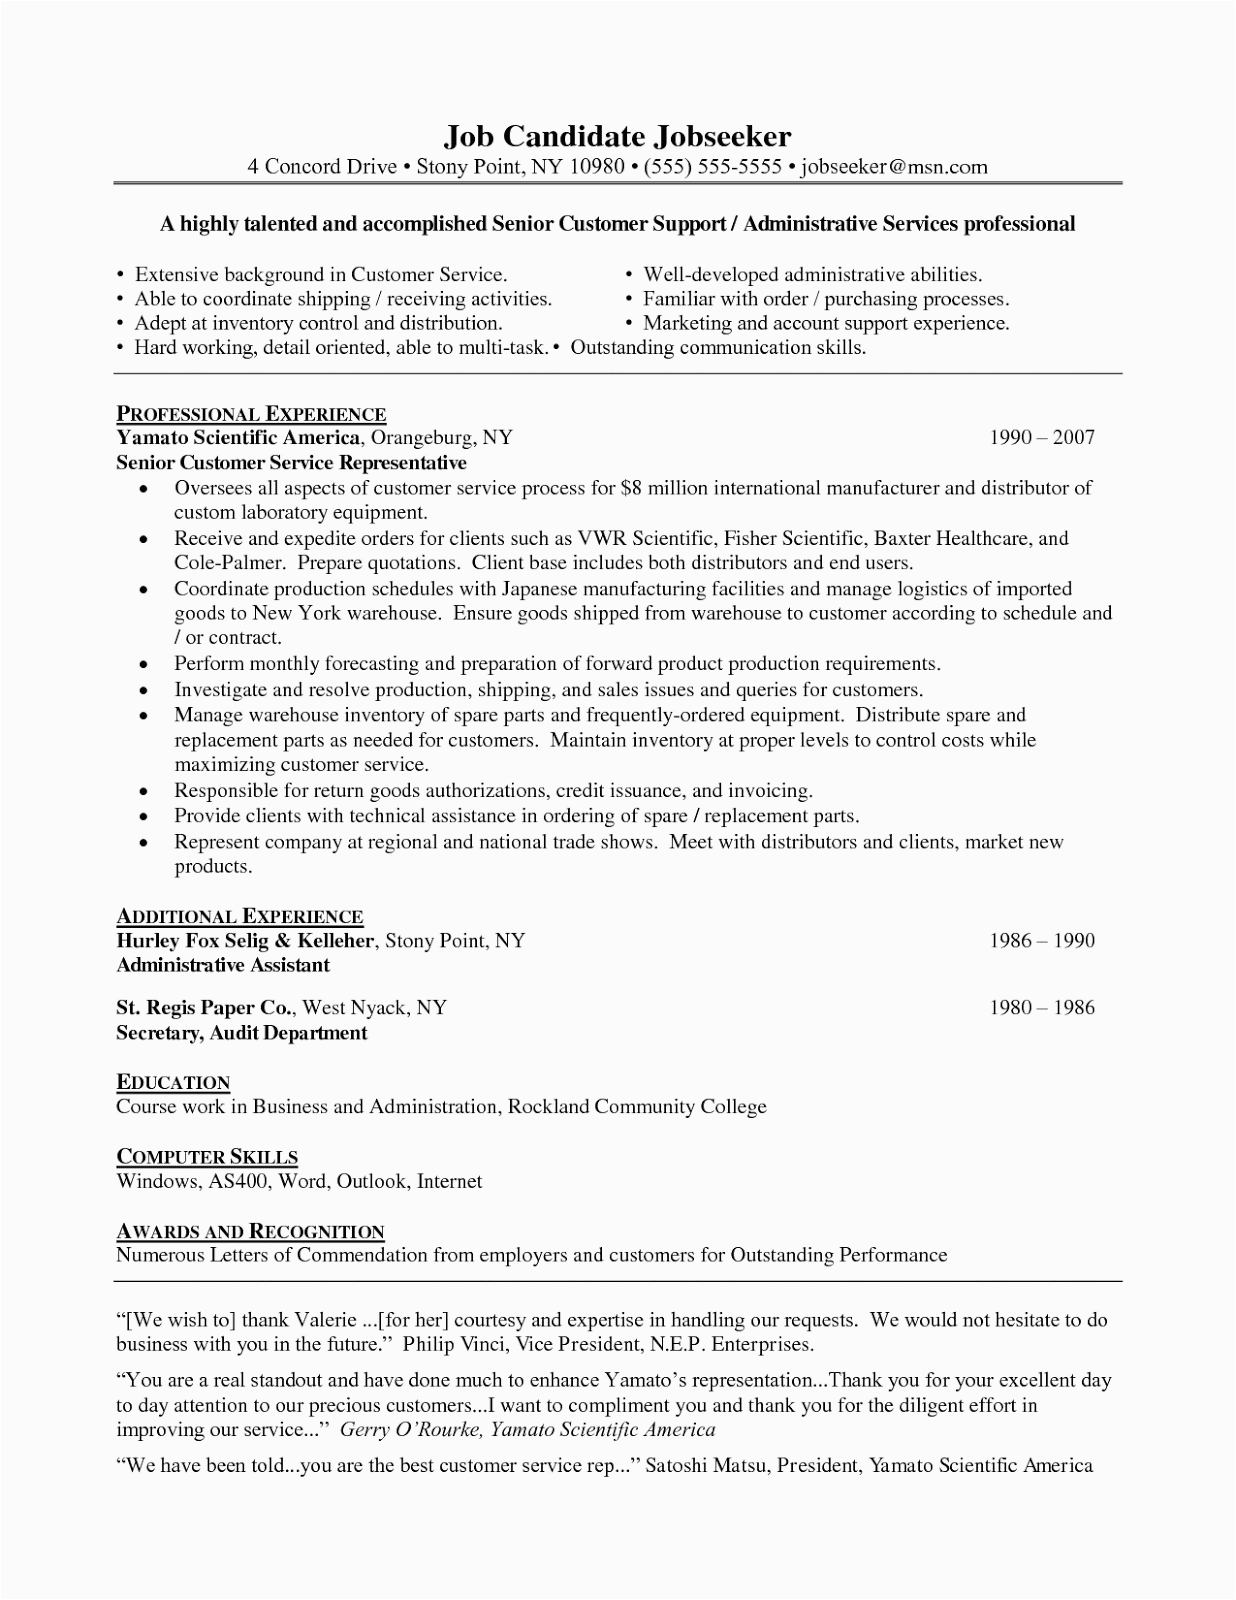 Samples Of Objectives for A Resume In Customer Service Good Objective for Resume Customer Service Tipss Und